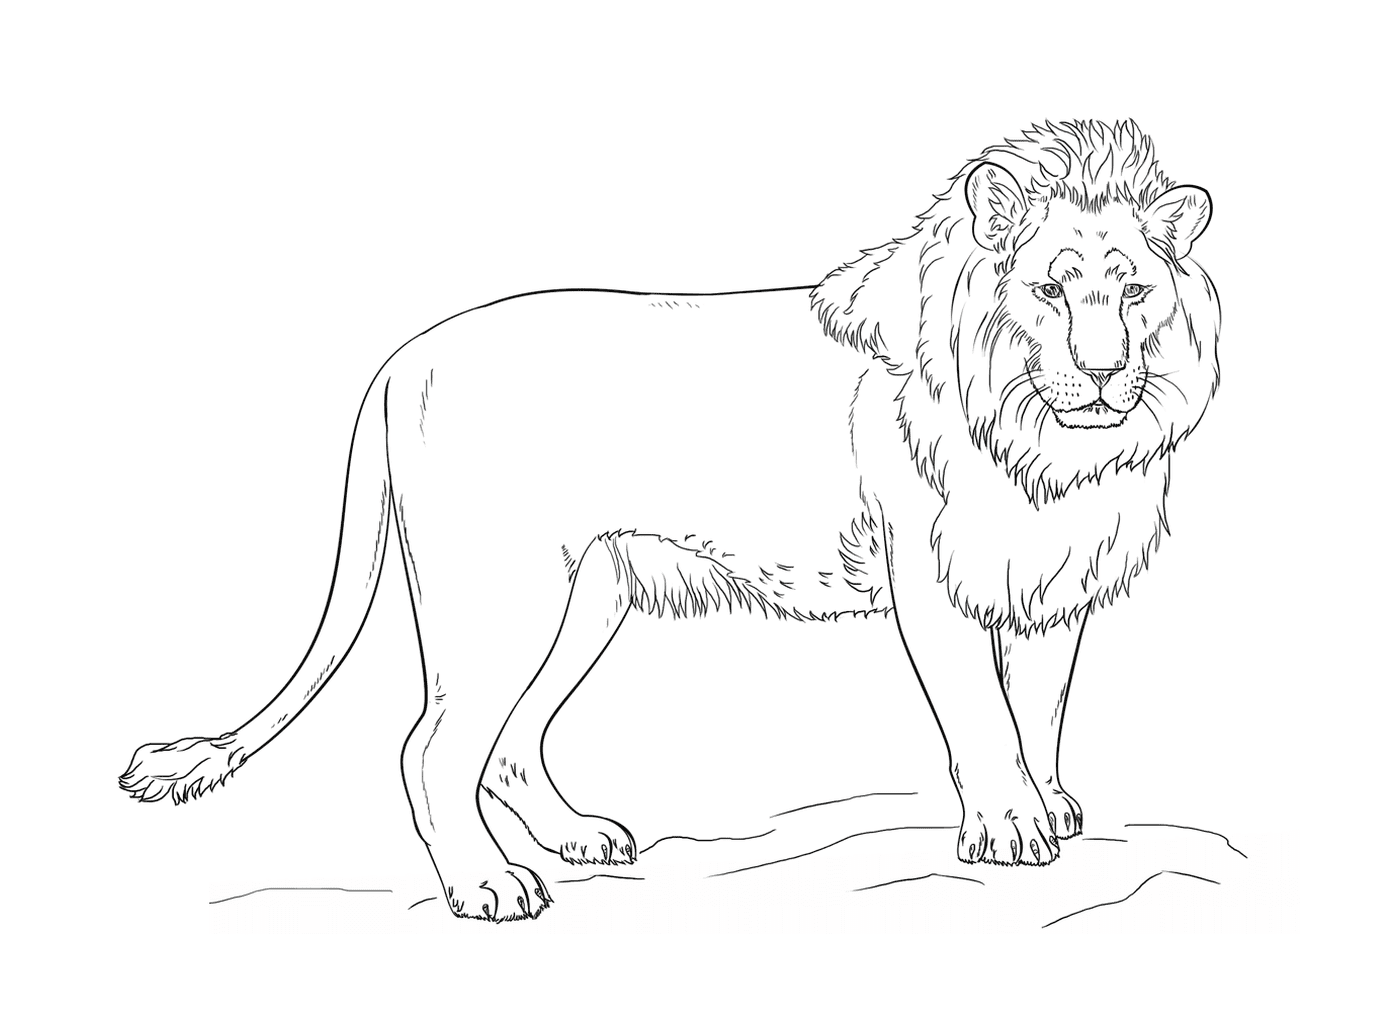  lion standing on a hill by Lena London 